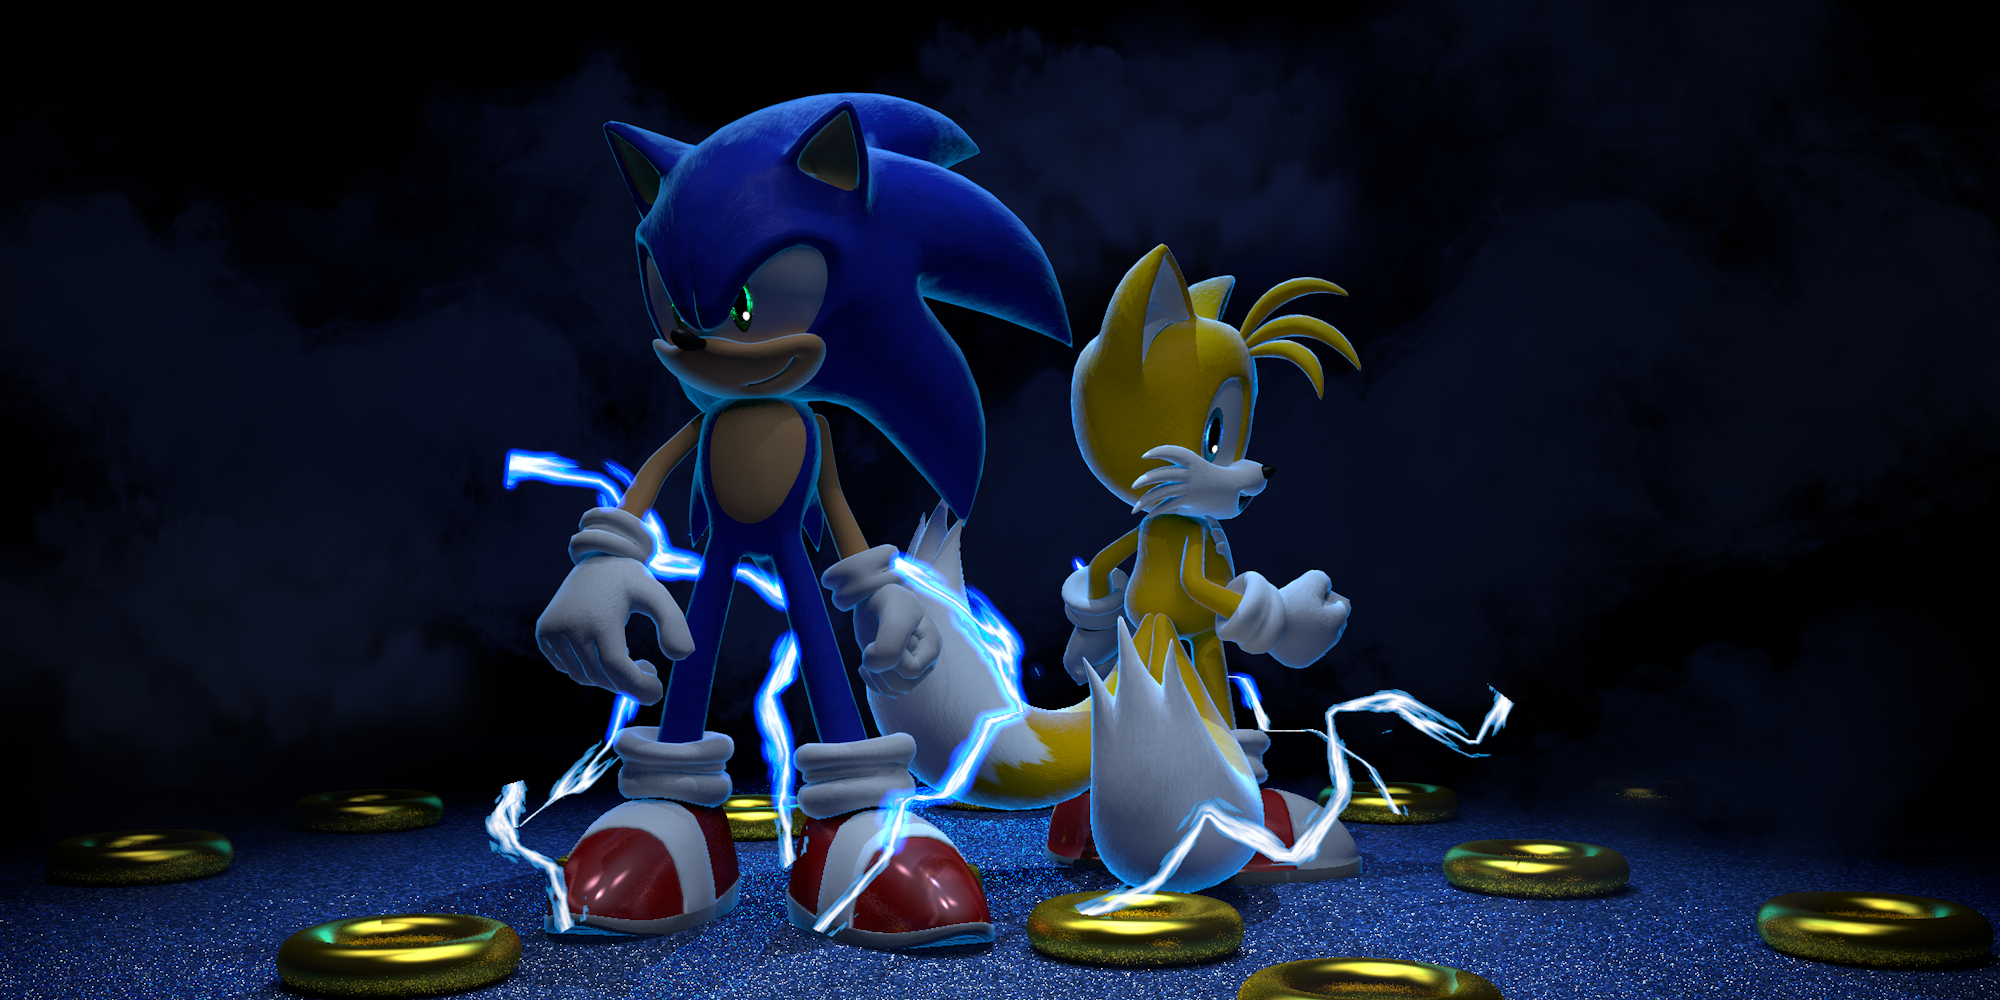 sonic-speed-simulator-main-render-in-my-style-by-blue007prime-on-deviantart